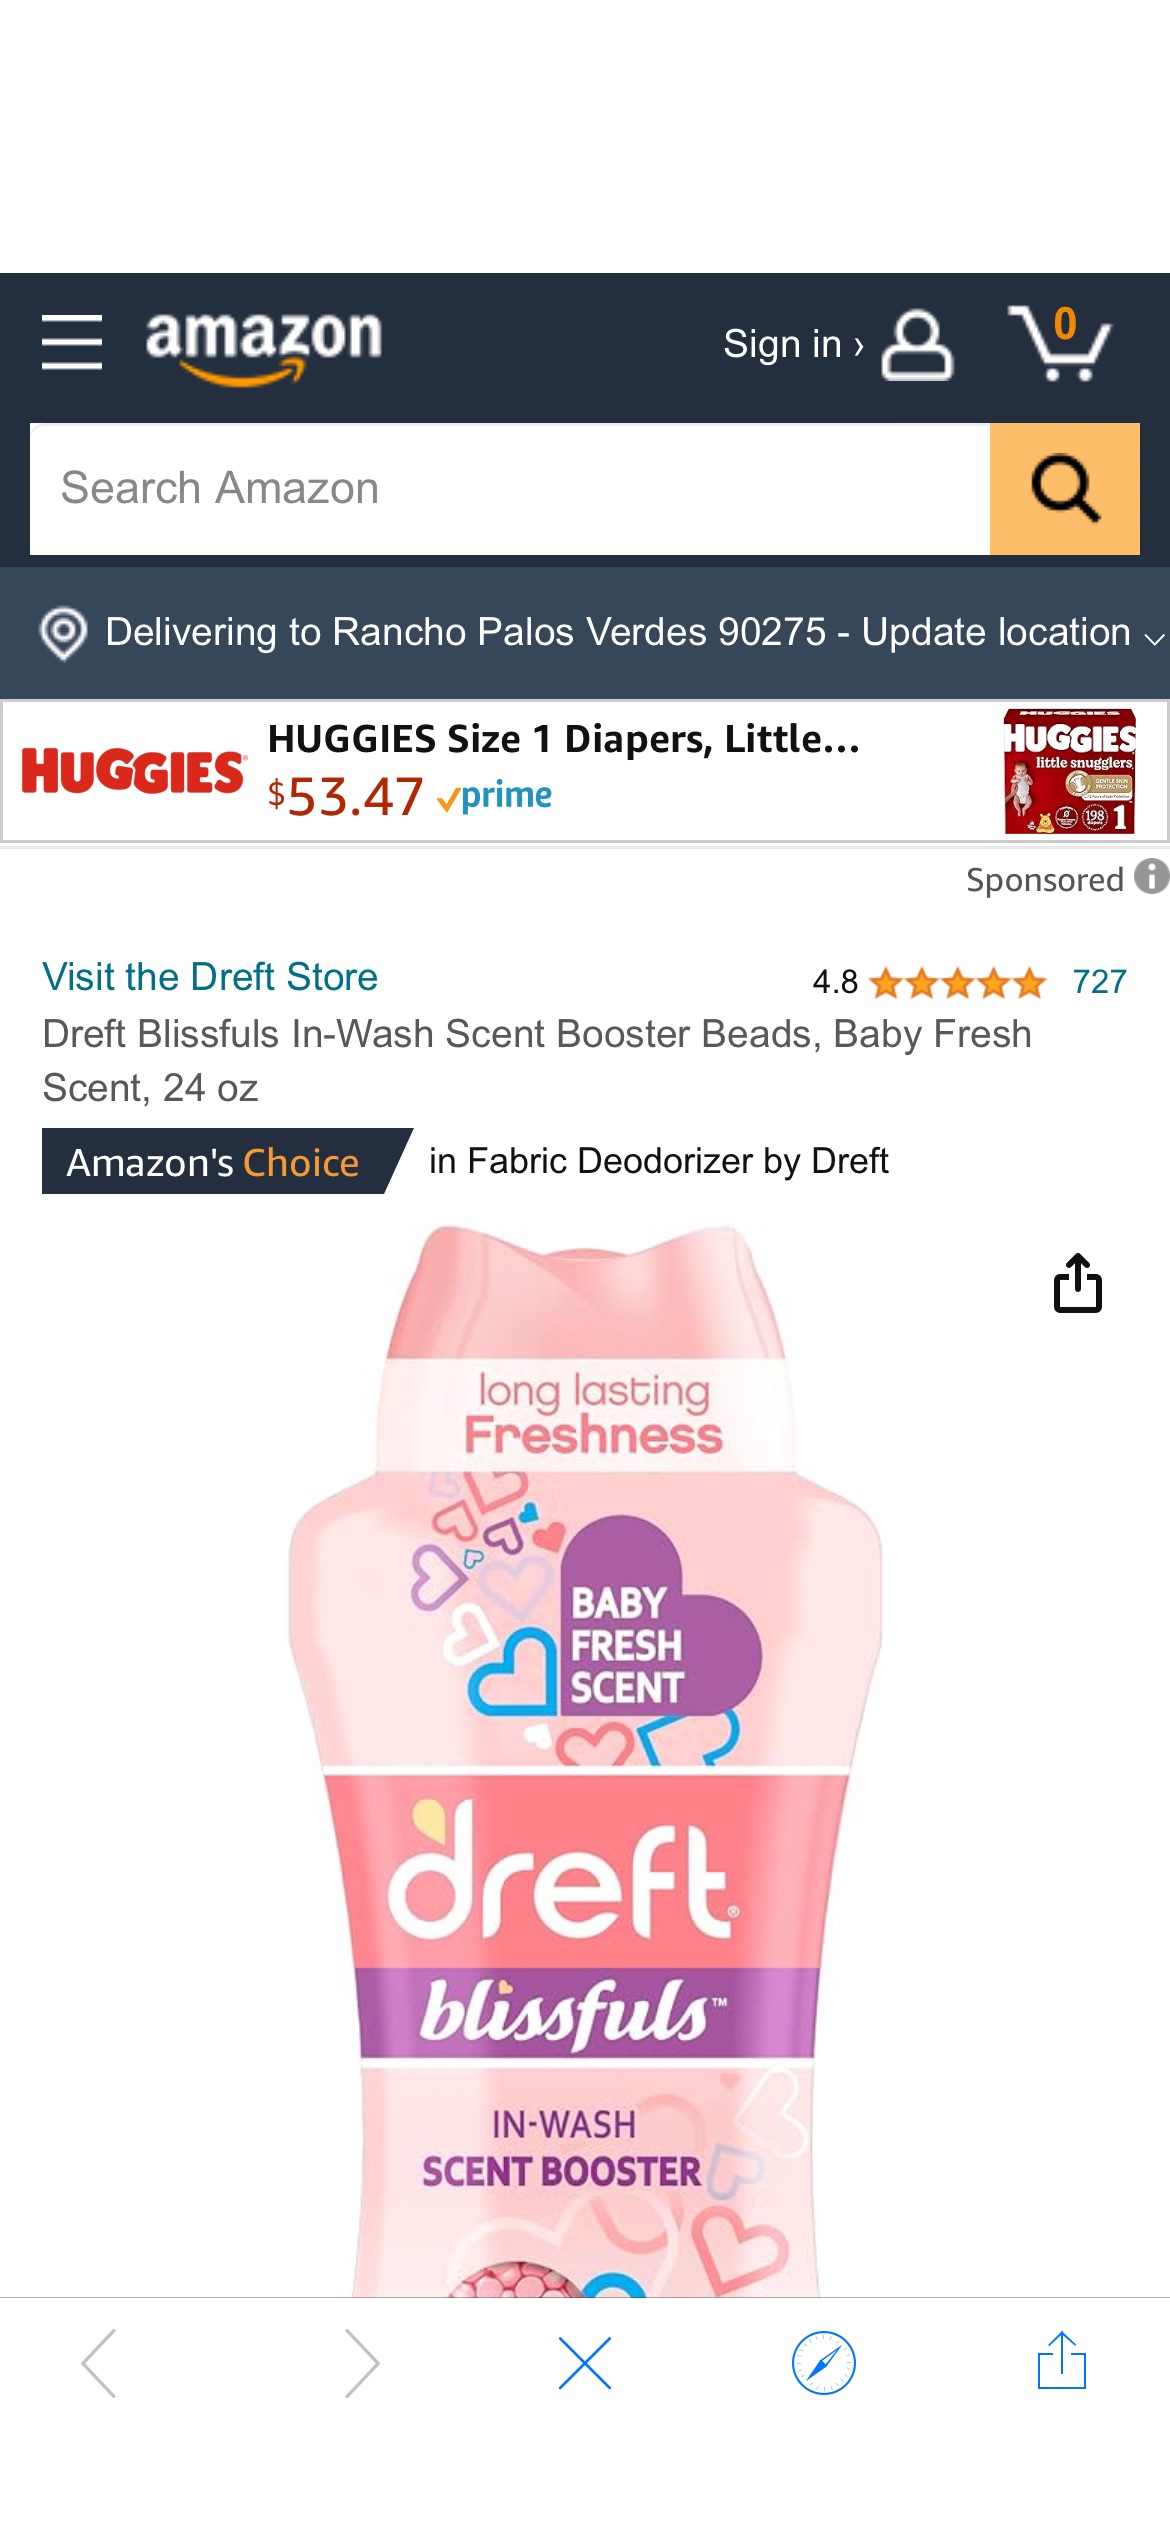 Amazon.com: Dreft Blissfuls In-Wash Scent Booster Beads, Baby Fresh Scent, 24 oz : Health & Household